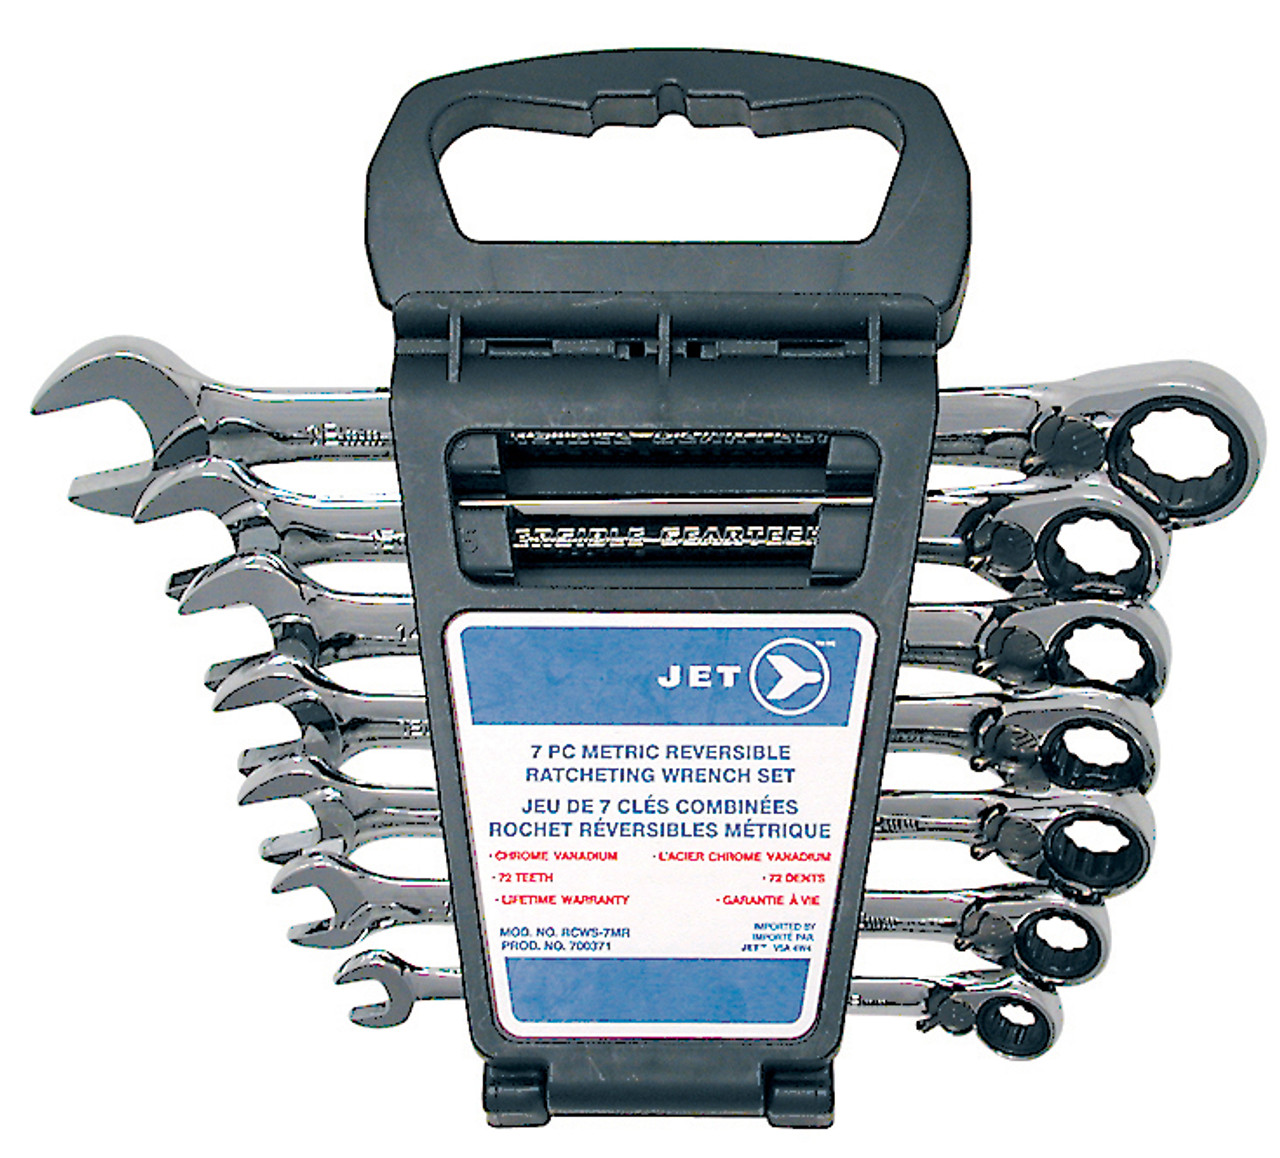 7 Pc. Long Metric Reversible Ratcheting Combination Wrench Set 700371